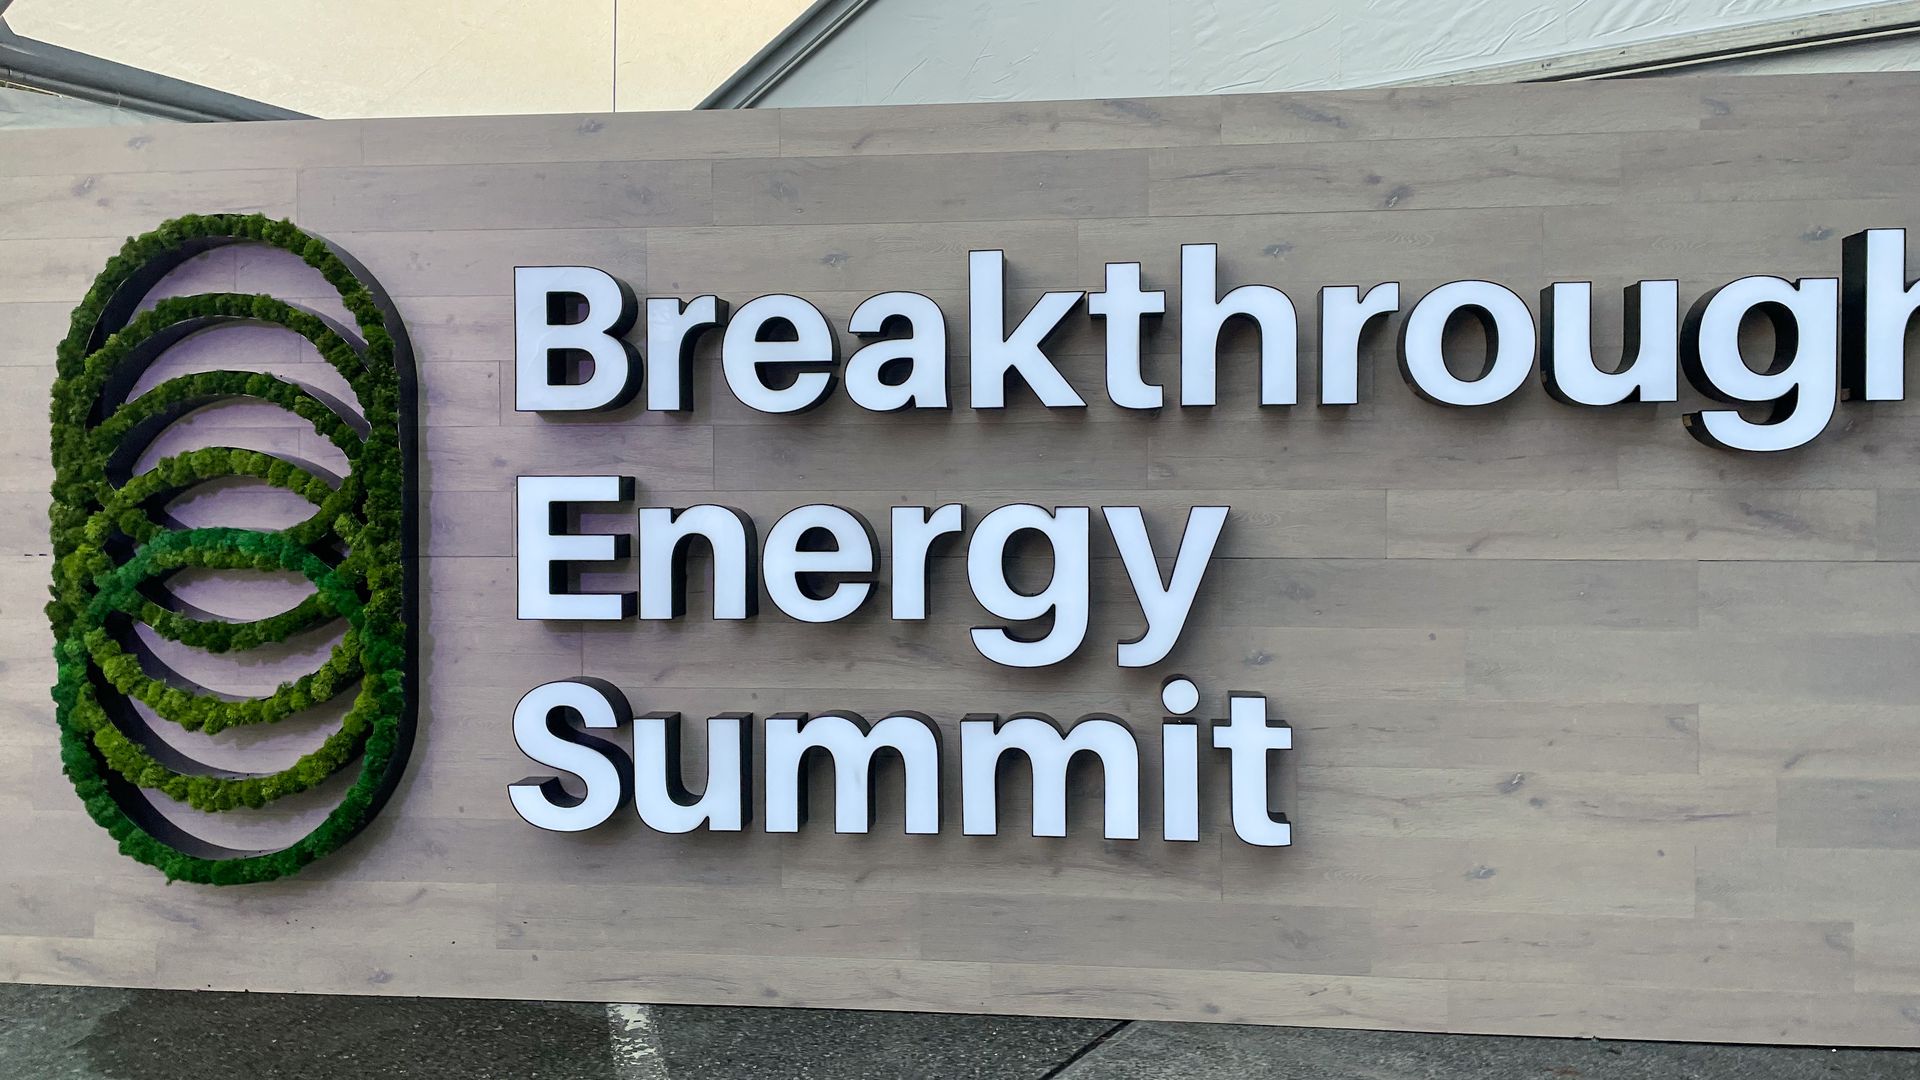 A photo of a glowing sign that says "Breakthrough Energy Summit" against a hazy orange sky.